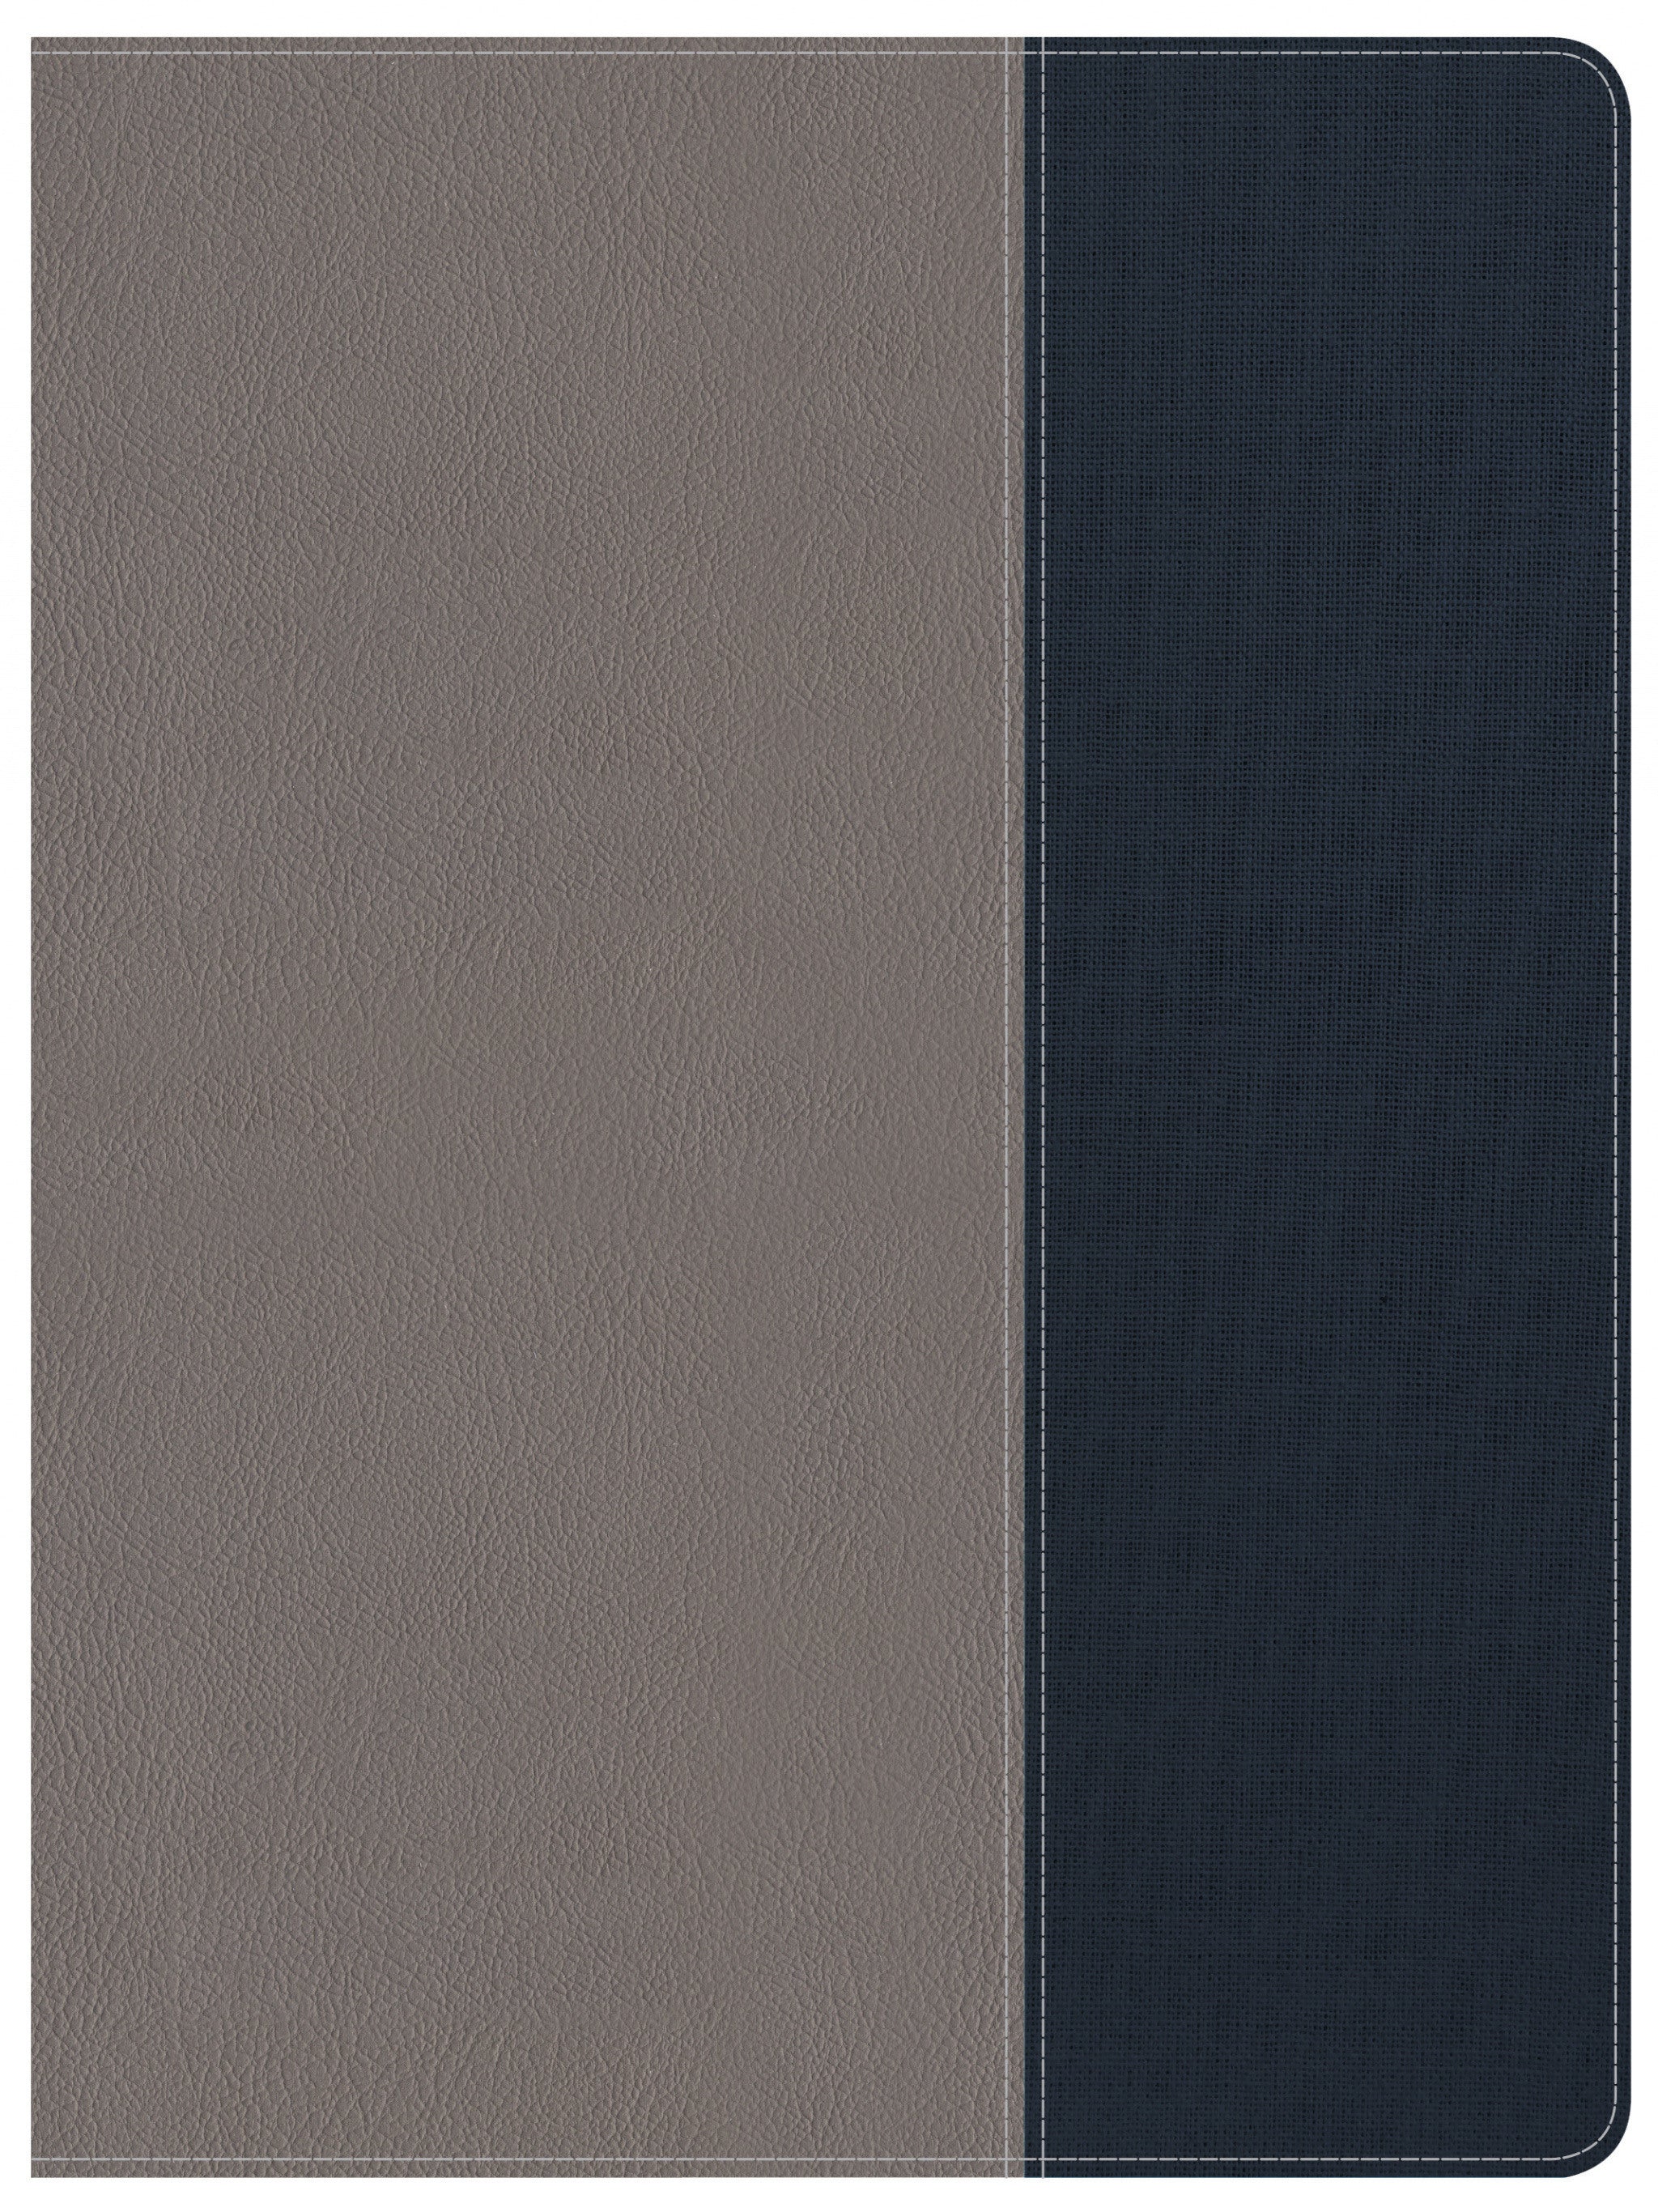 Image of CSB Apologetics Study Bible for Students, Gray/Navy LeatherTouch other